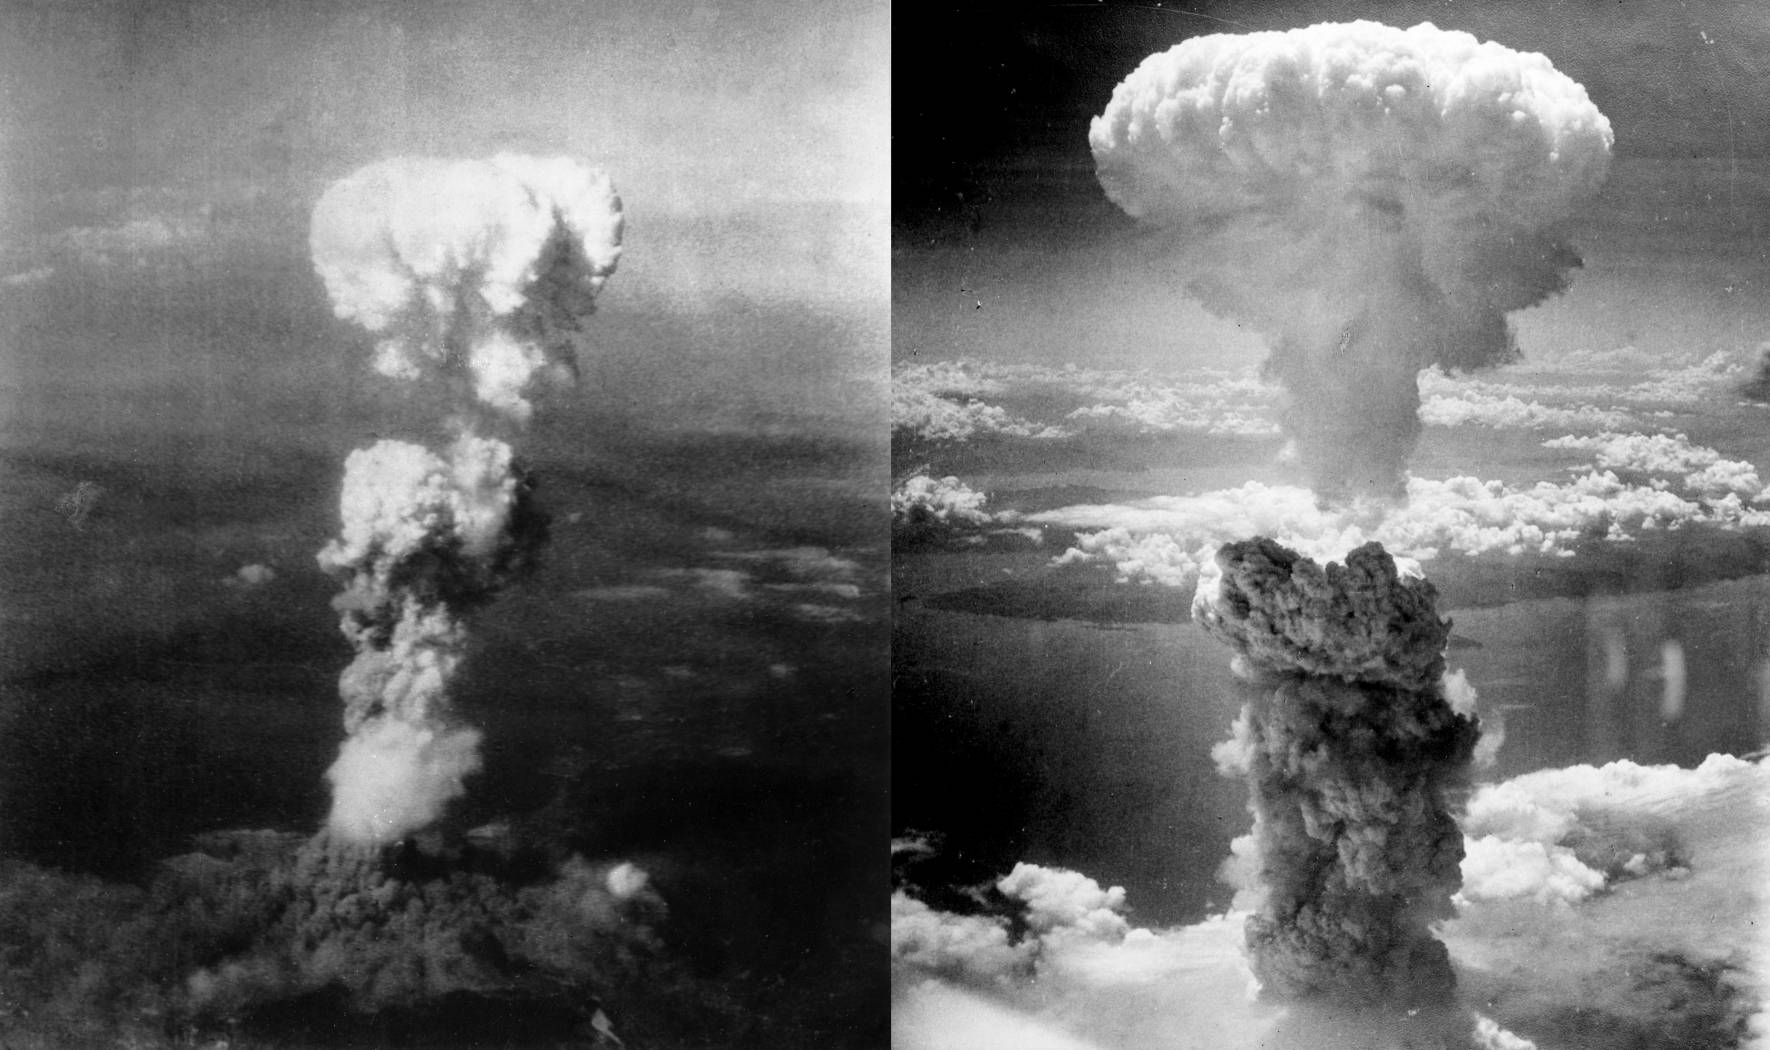 Hiroshima's haunting shadows: The atomic blasts that left scars on humanity 1